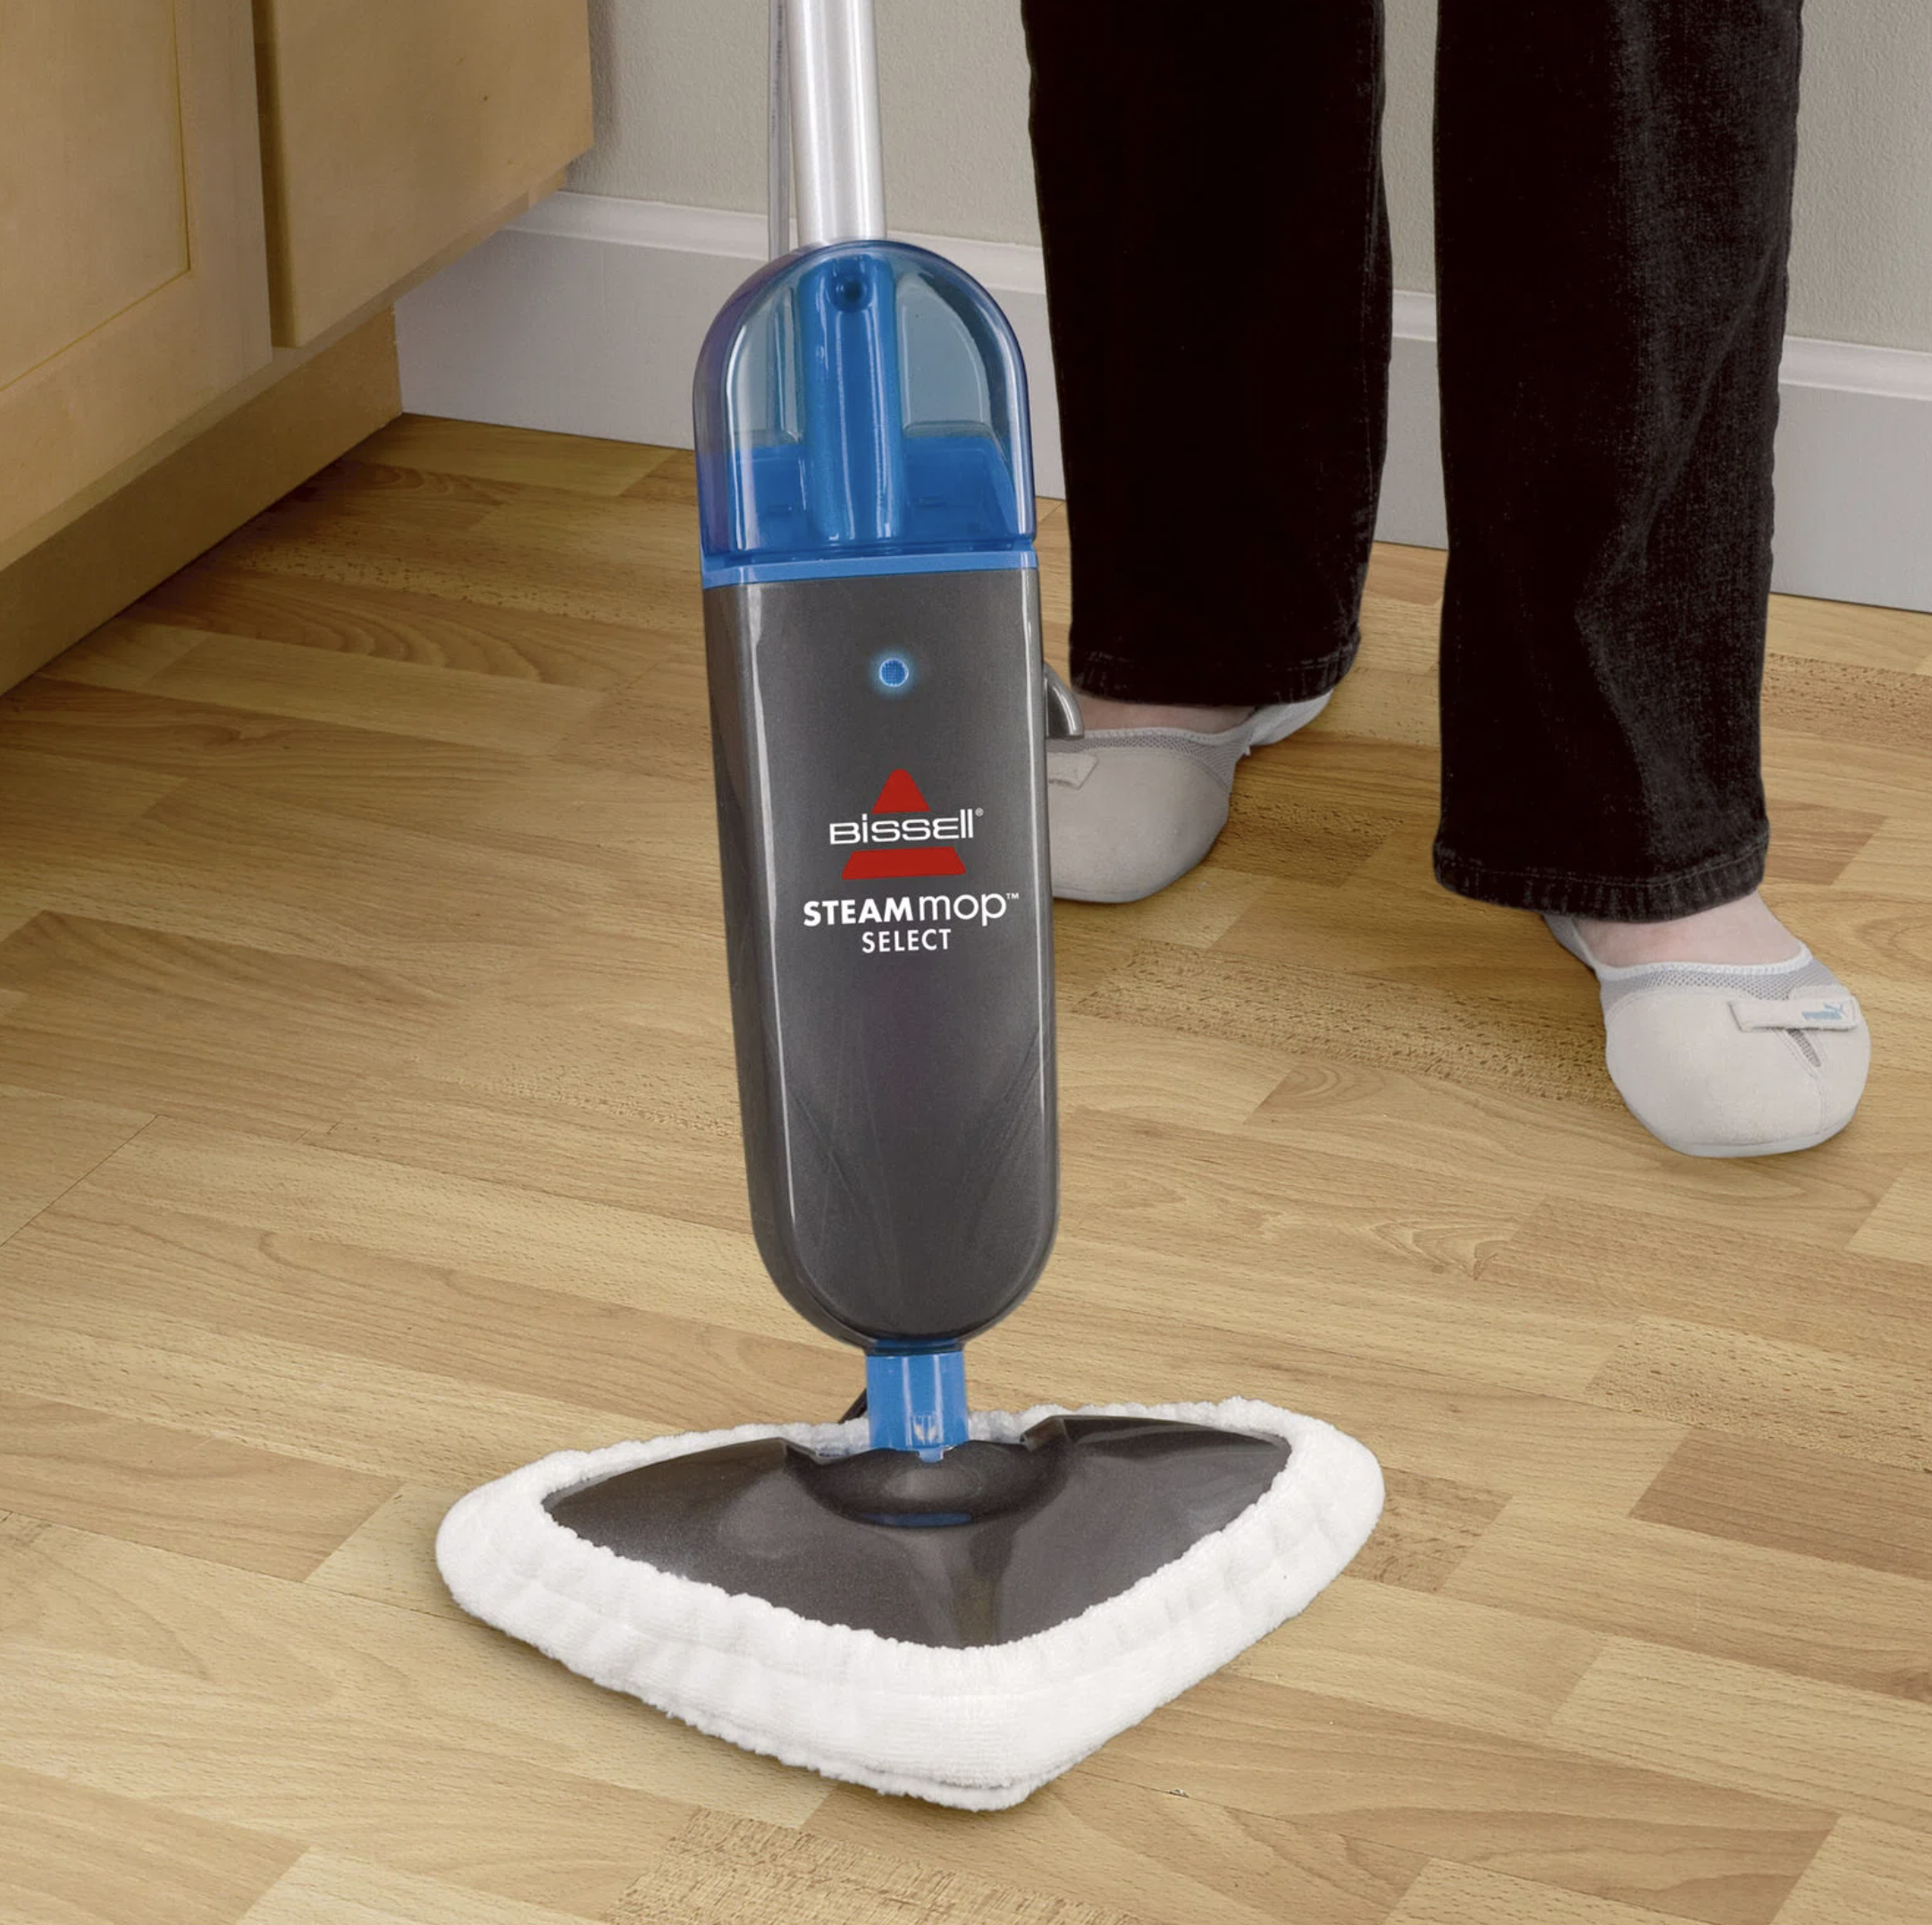 the steam mop on a wooden floor